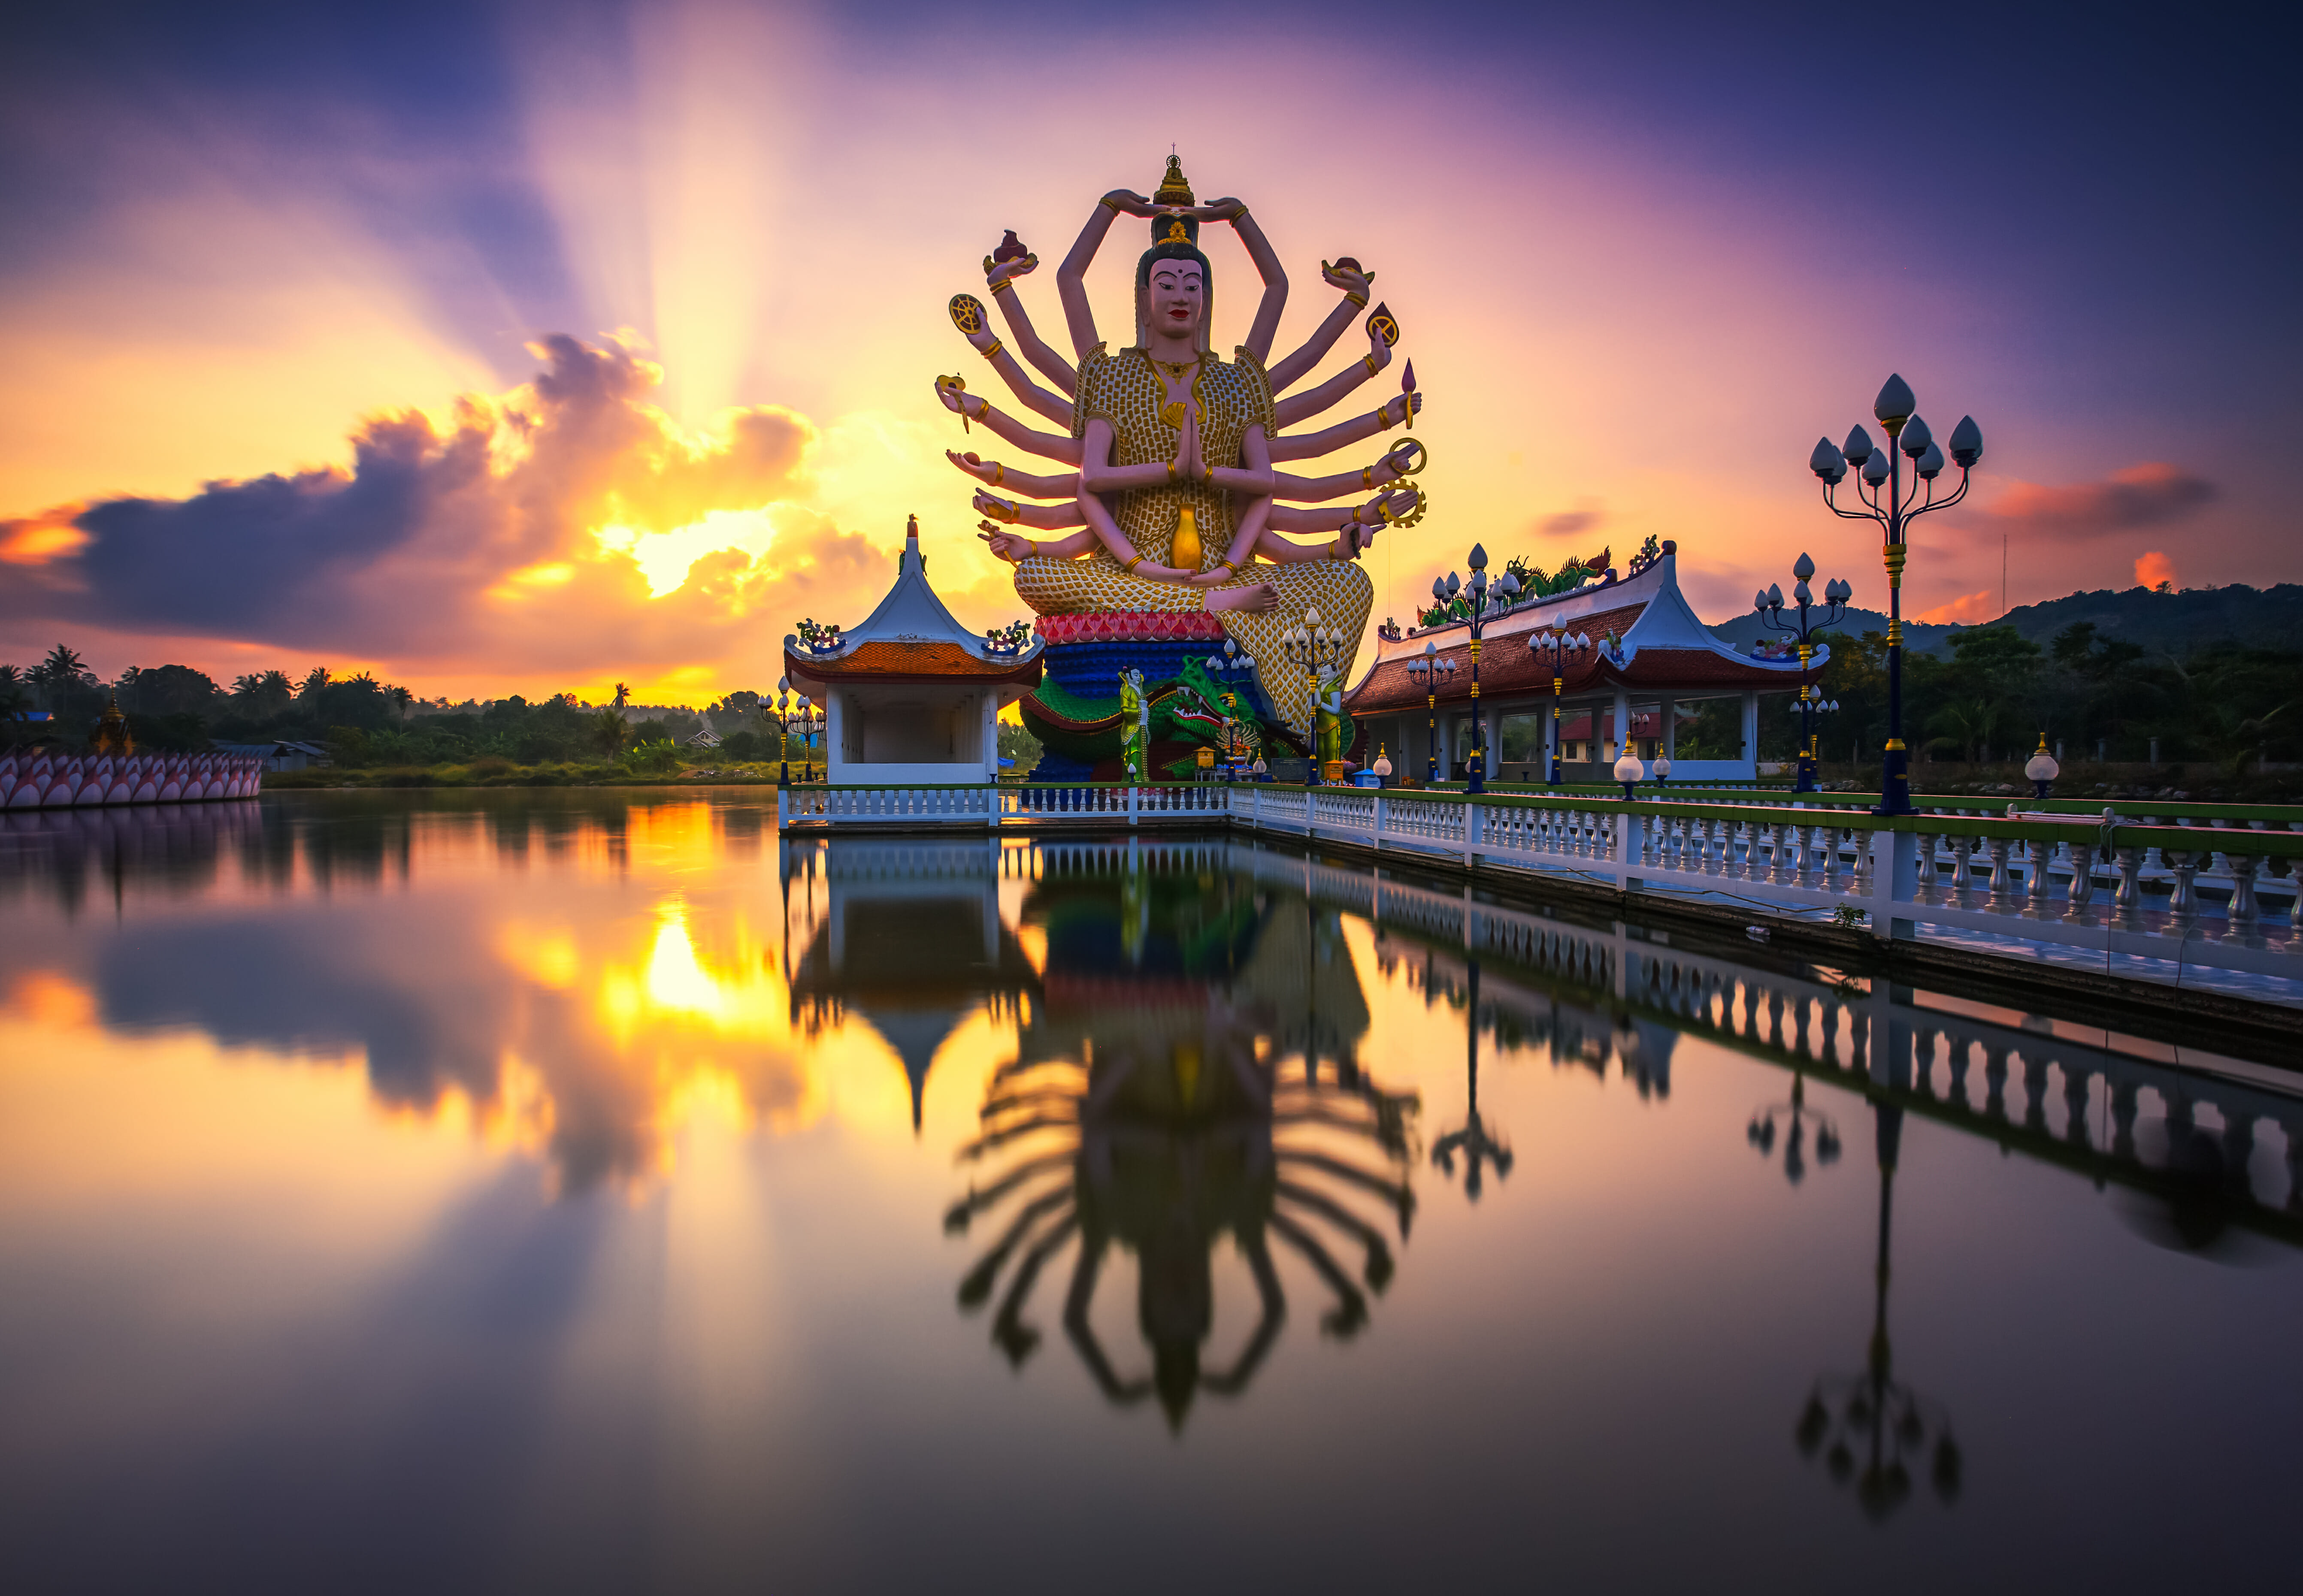 Thailand Buddhist Temples with large giant Buddha statue